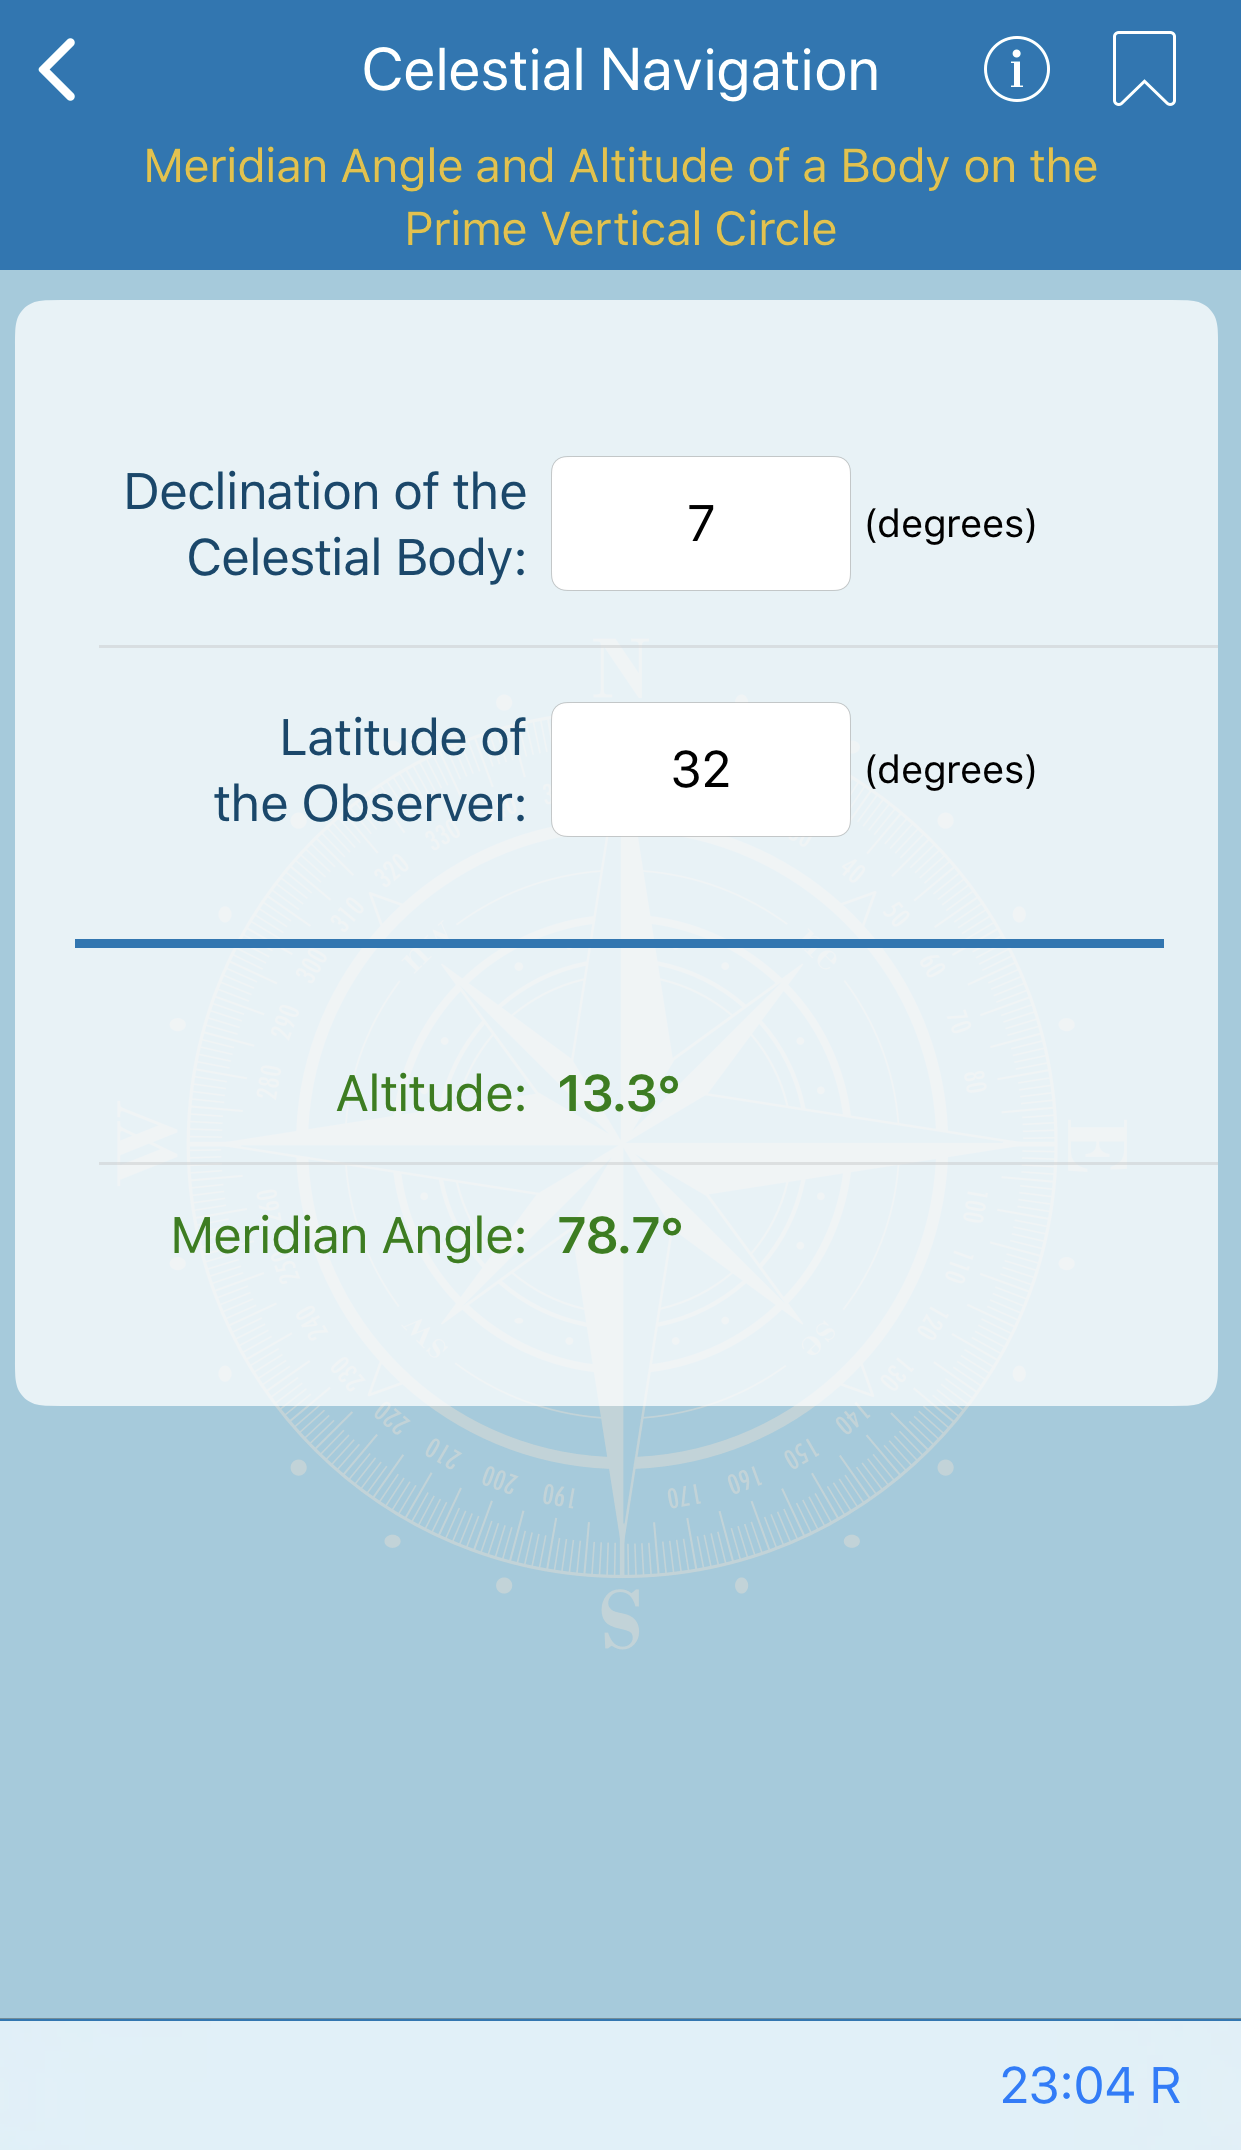 Meridian Angle and Altitude of a Body on the Prime Vertical Circle